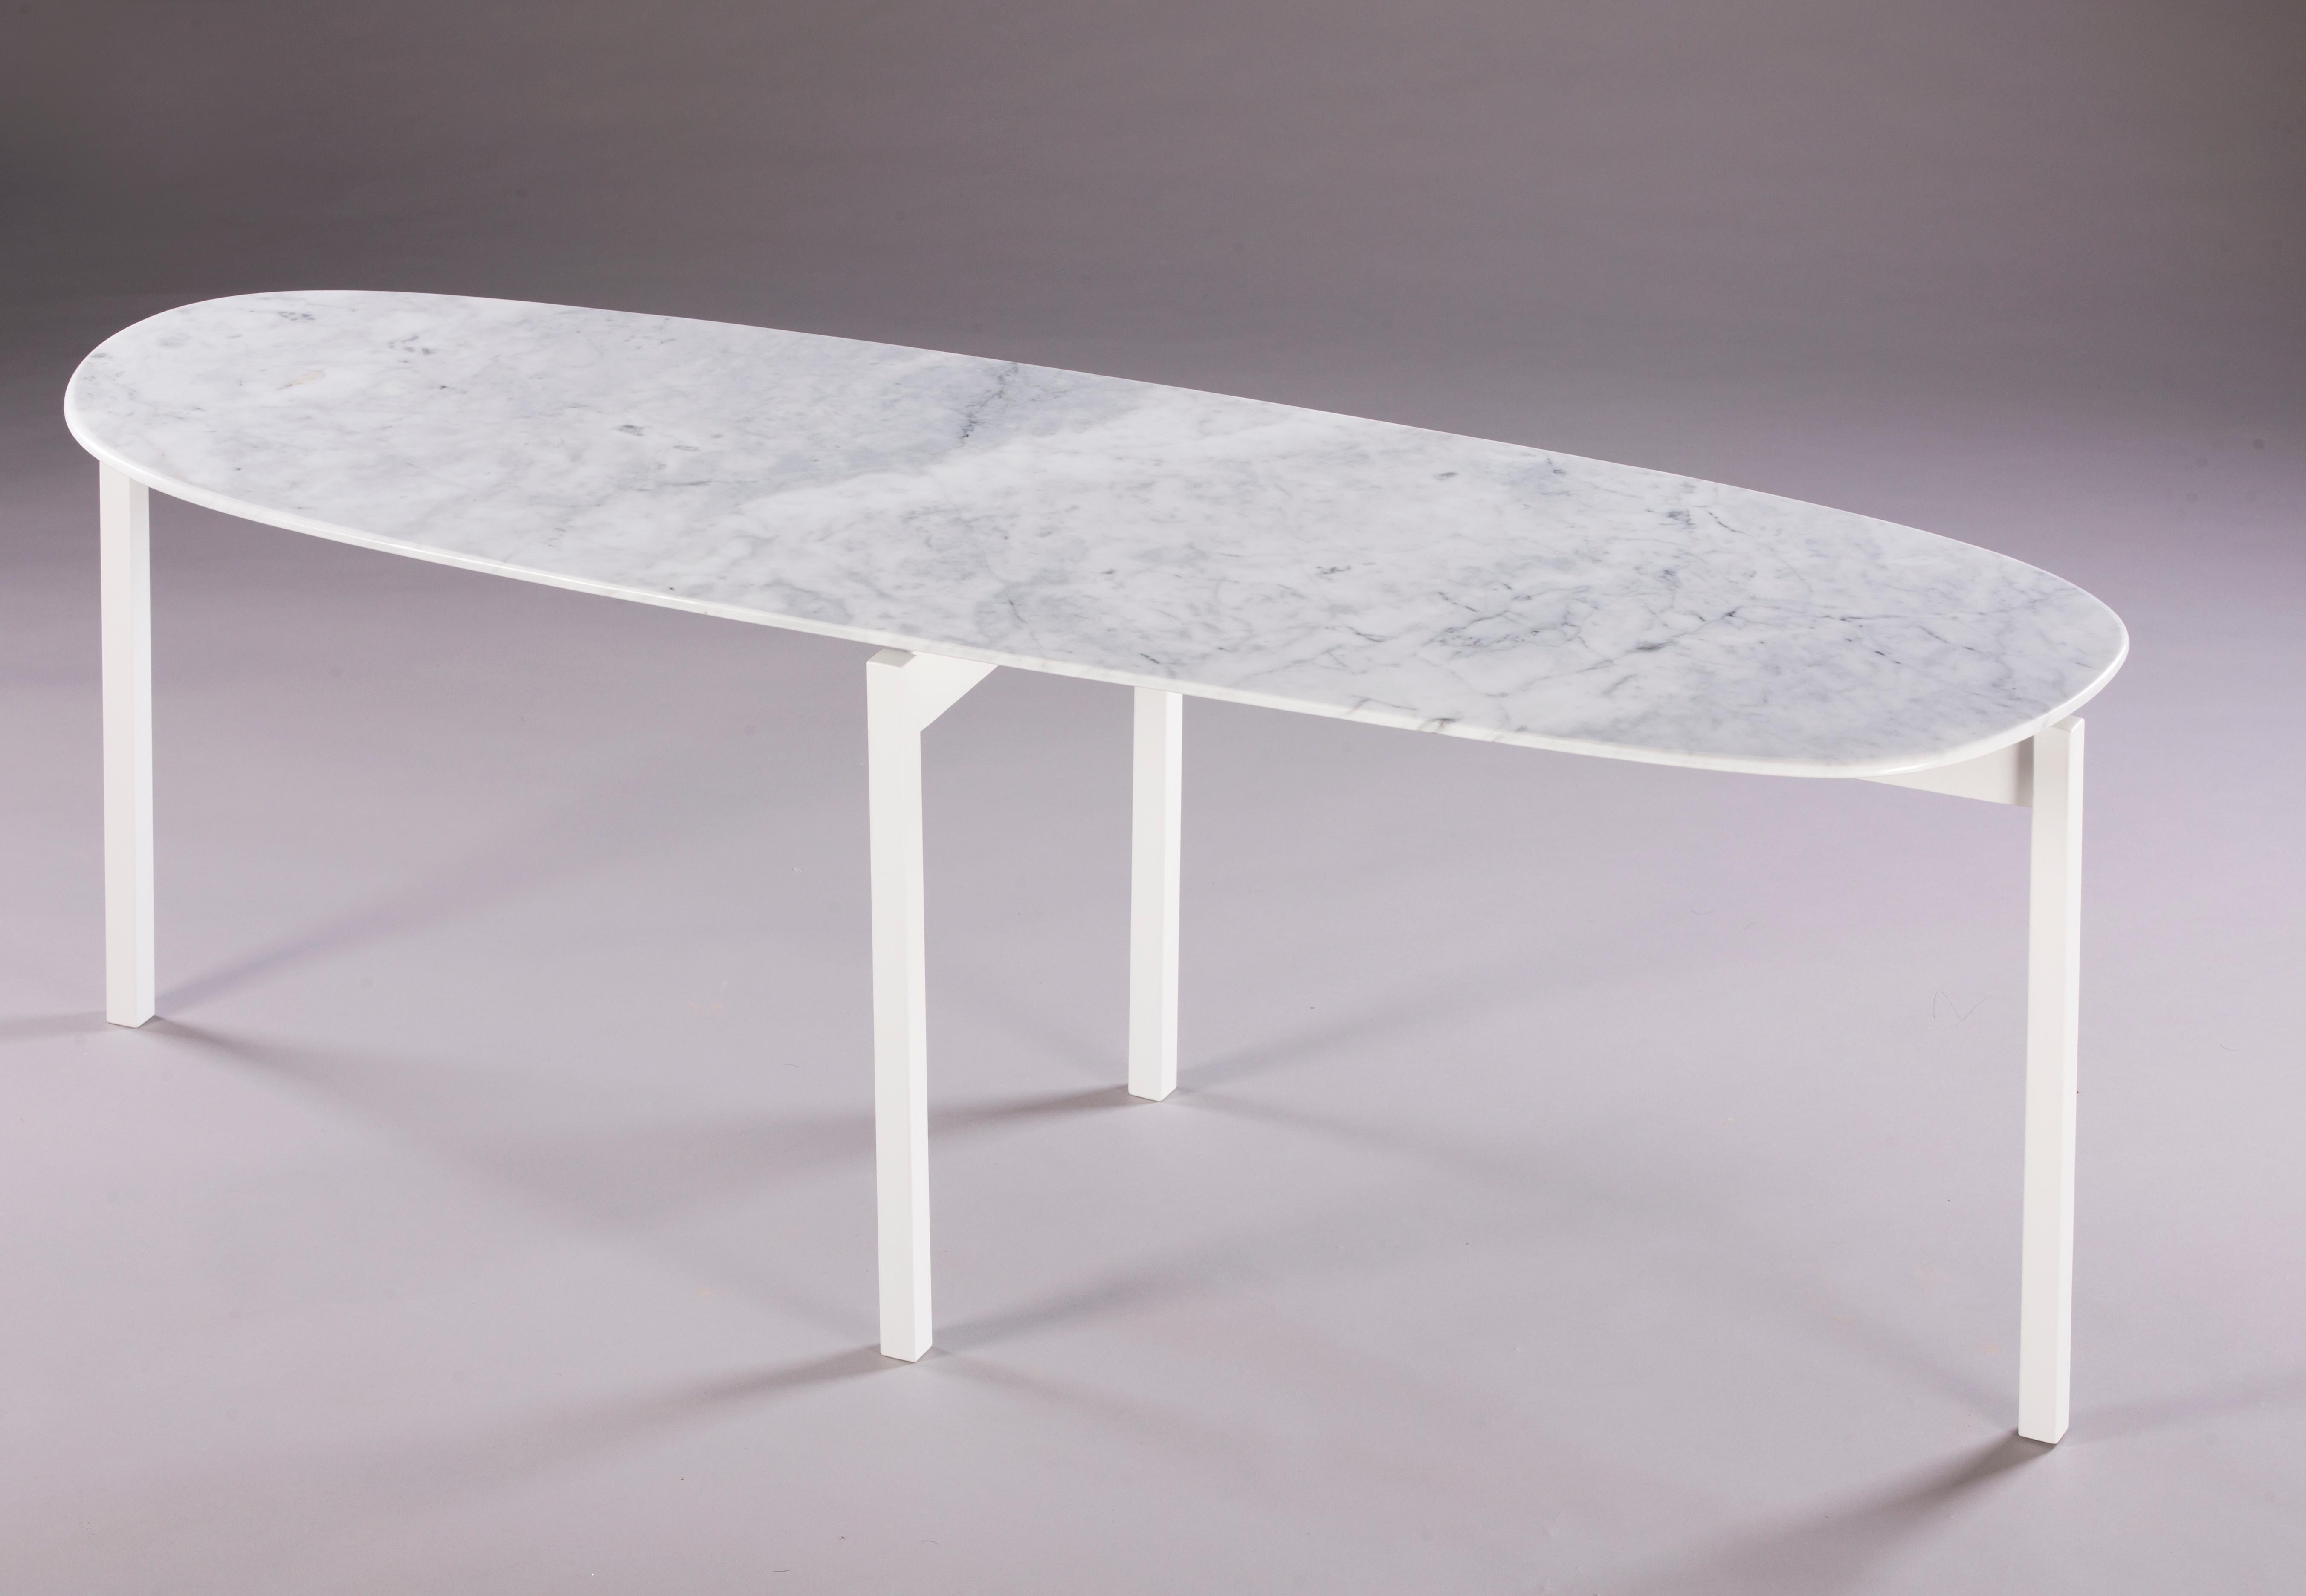 Uzun Tas coffee table by Rectangle Studio
Dimensions: W 120 x D 40 x H 43 cm 
Materials: White marble, white paint coating on metal

Tas_Uzun Sehpa was shaped and finished by the marble table designer.
For this reason, each table has different